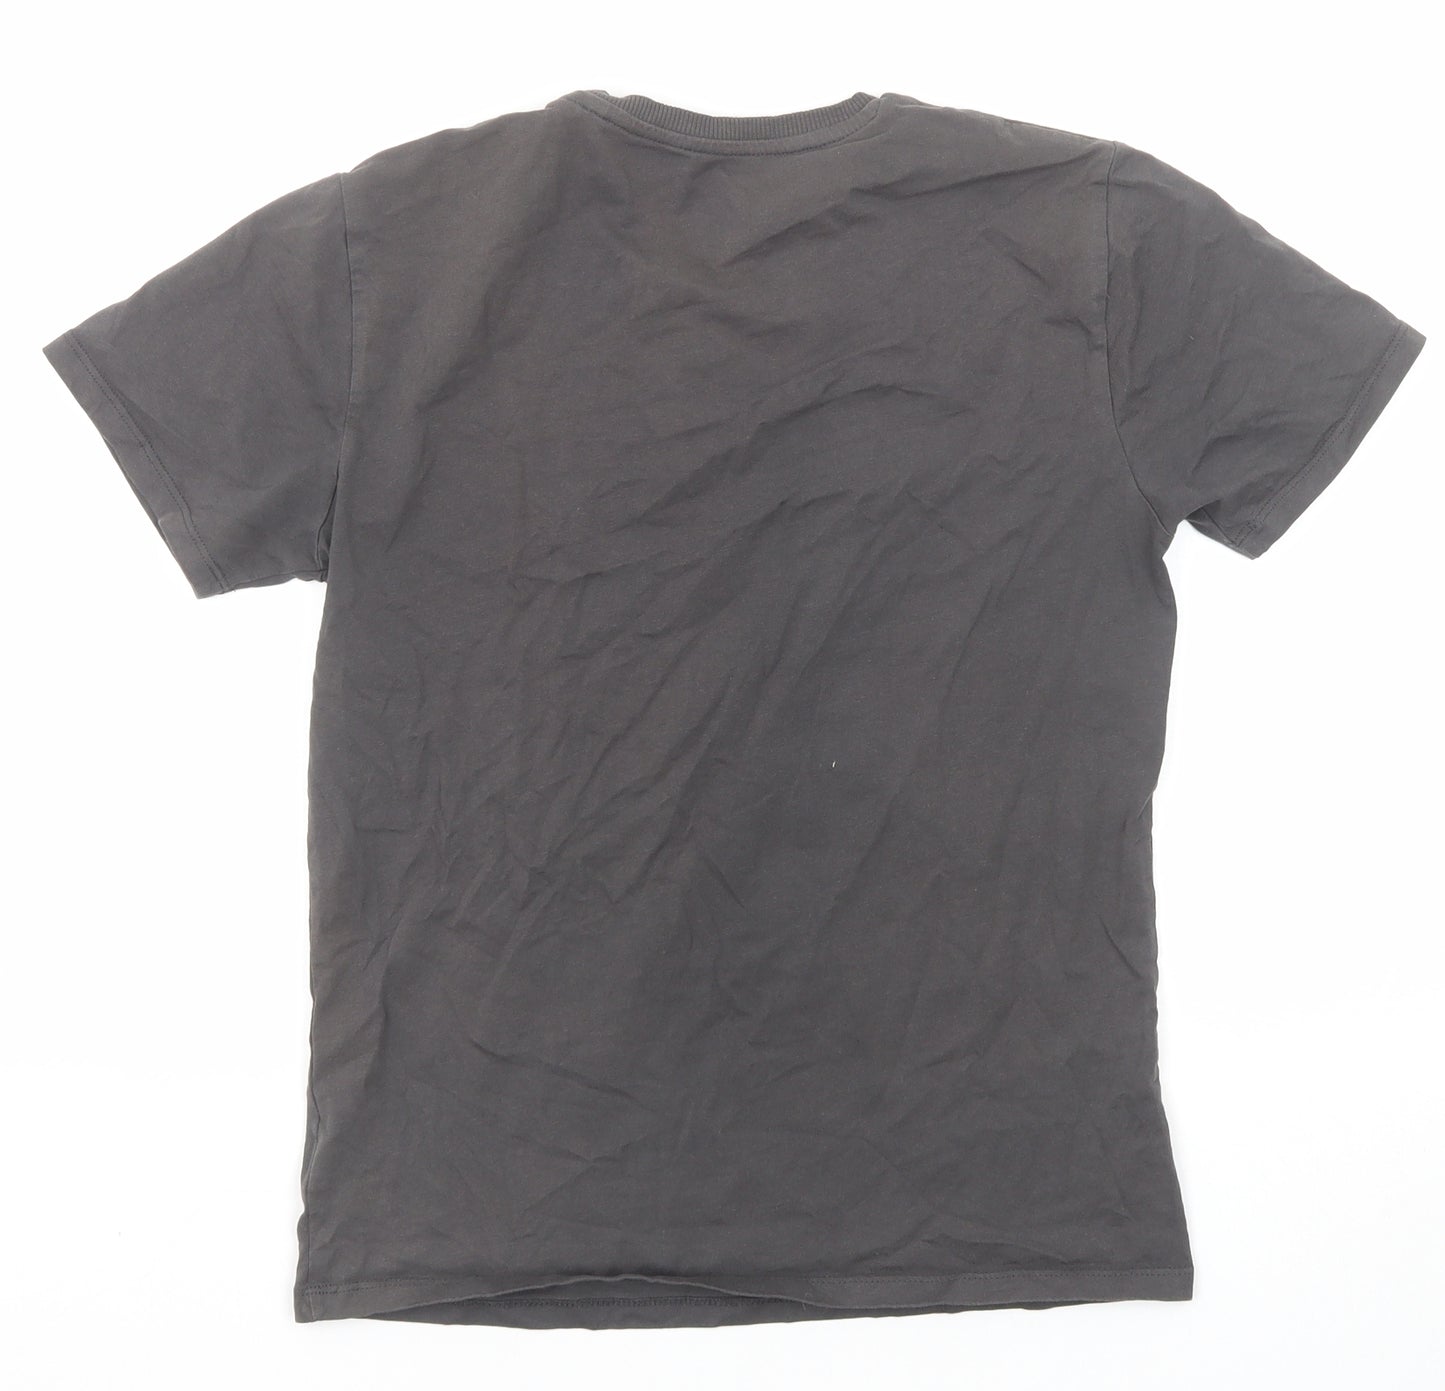 NEXT Boys Grey Cotton Basic T-Shirt Size 12 Years Round Neck Pullover - Among Us